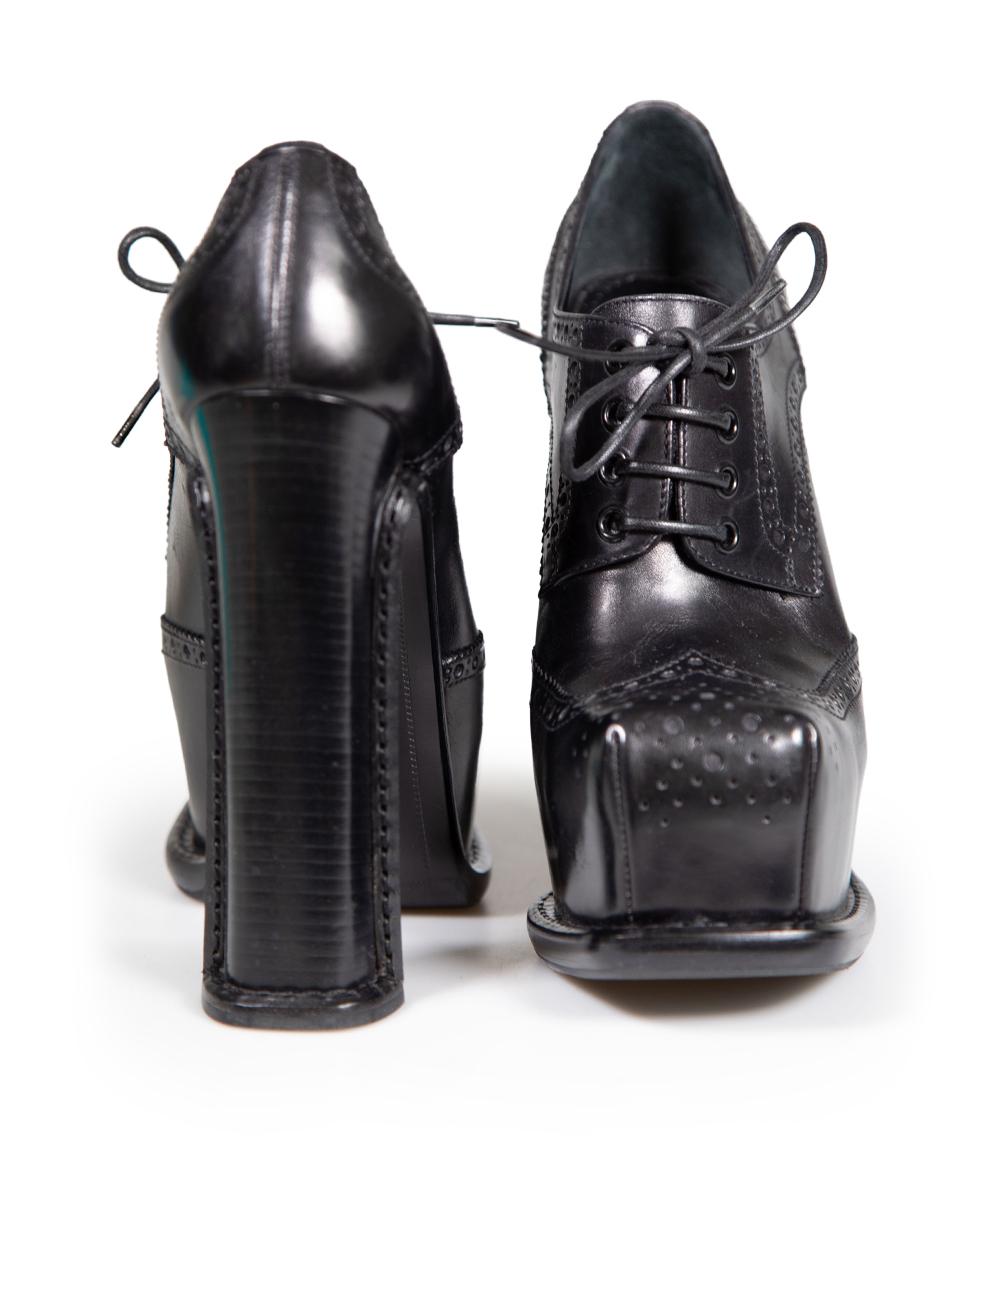 Louis Vuitton Fall 2012 Black Leather Brogue Derby Platform Heels Size IT 38.5 In Good Condition For Sale In London, GB